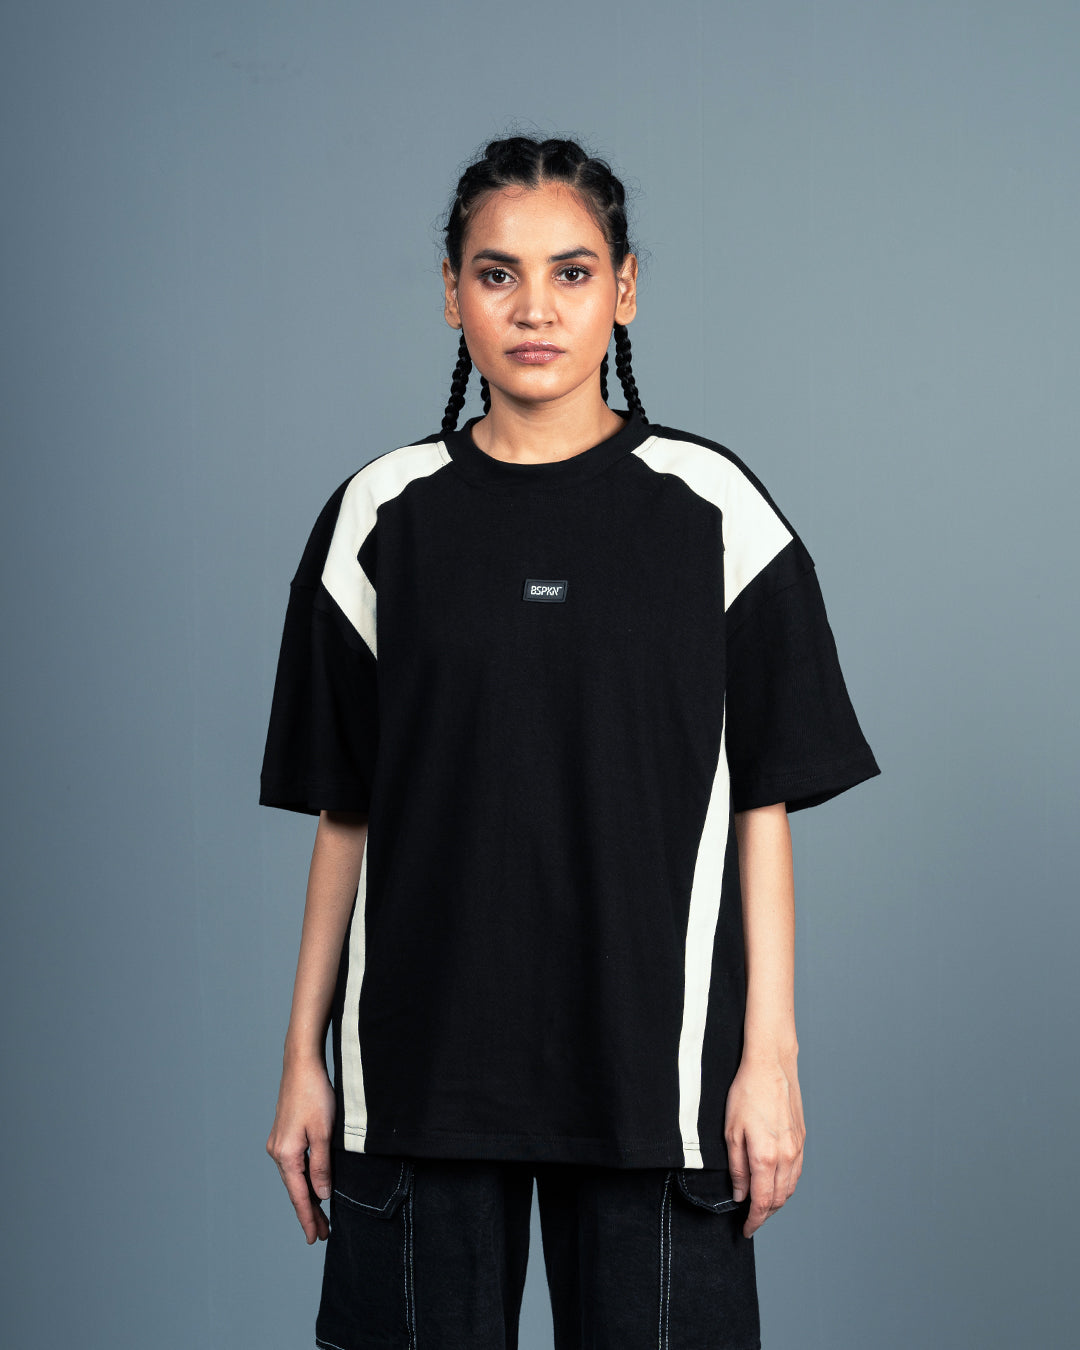 Black & White Contrast Tee - Oversized Fit